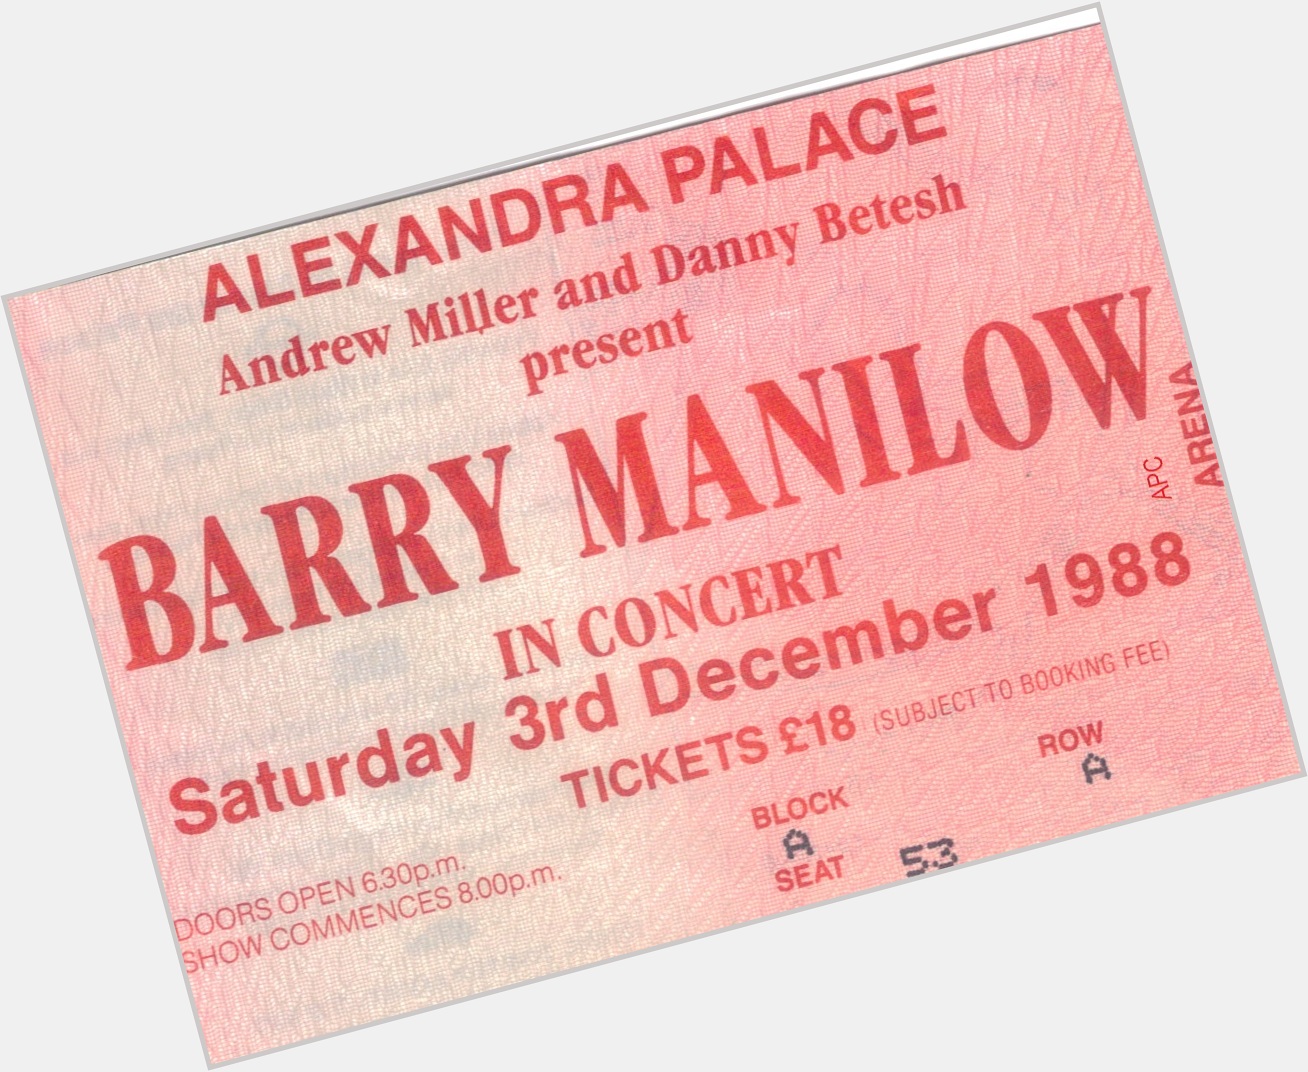 Happy Birthday to Barry Manilow, born in 1943.
He played Alexandra Palace in 1988! 